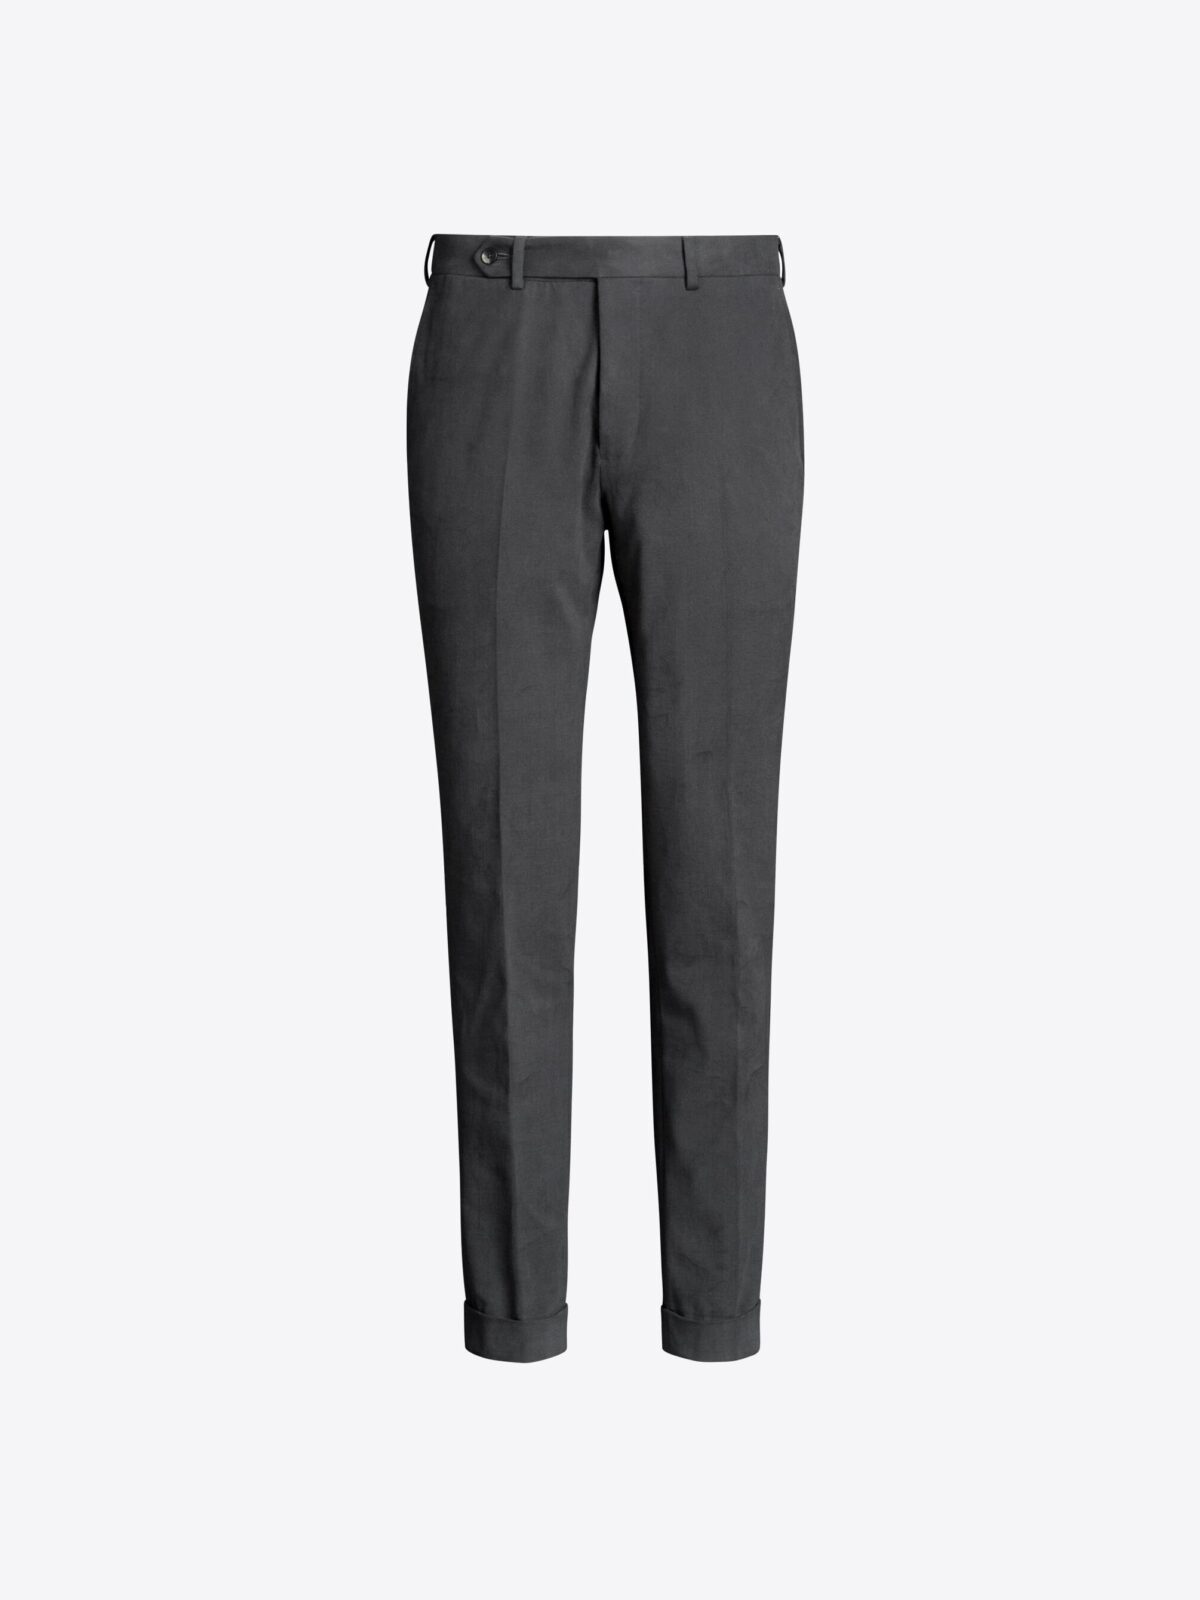 Grey Heavy Brushed Cotton Stretch Dress Pant